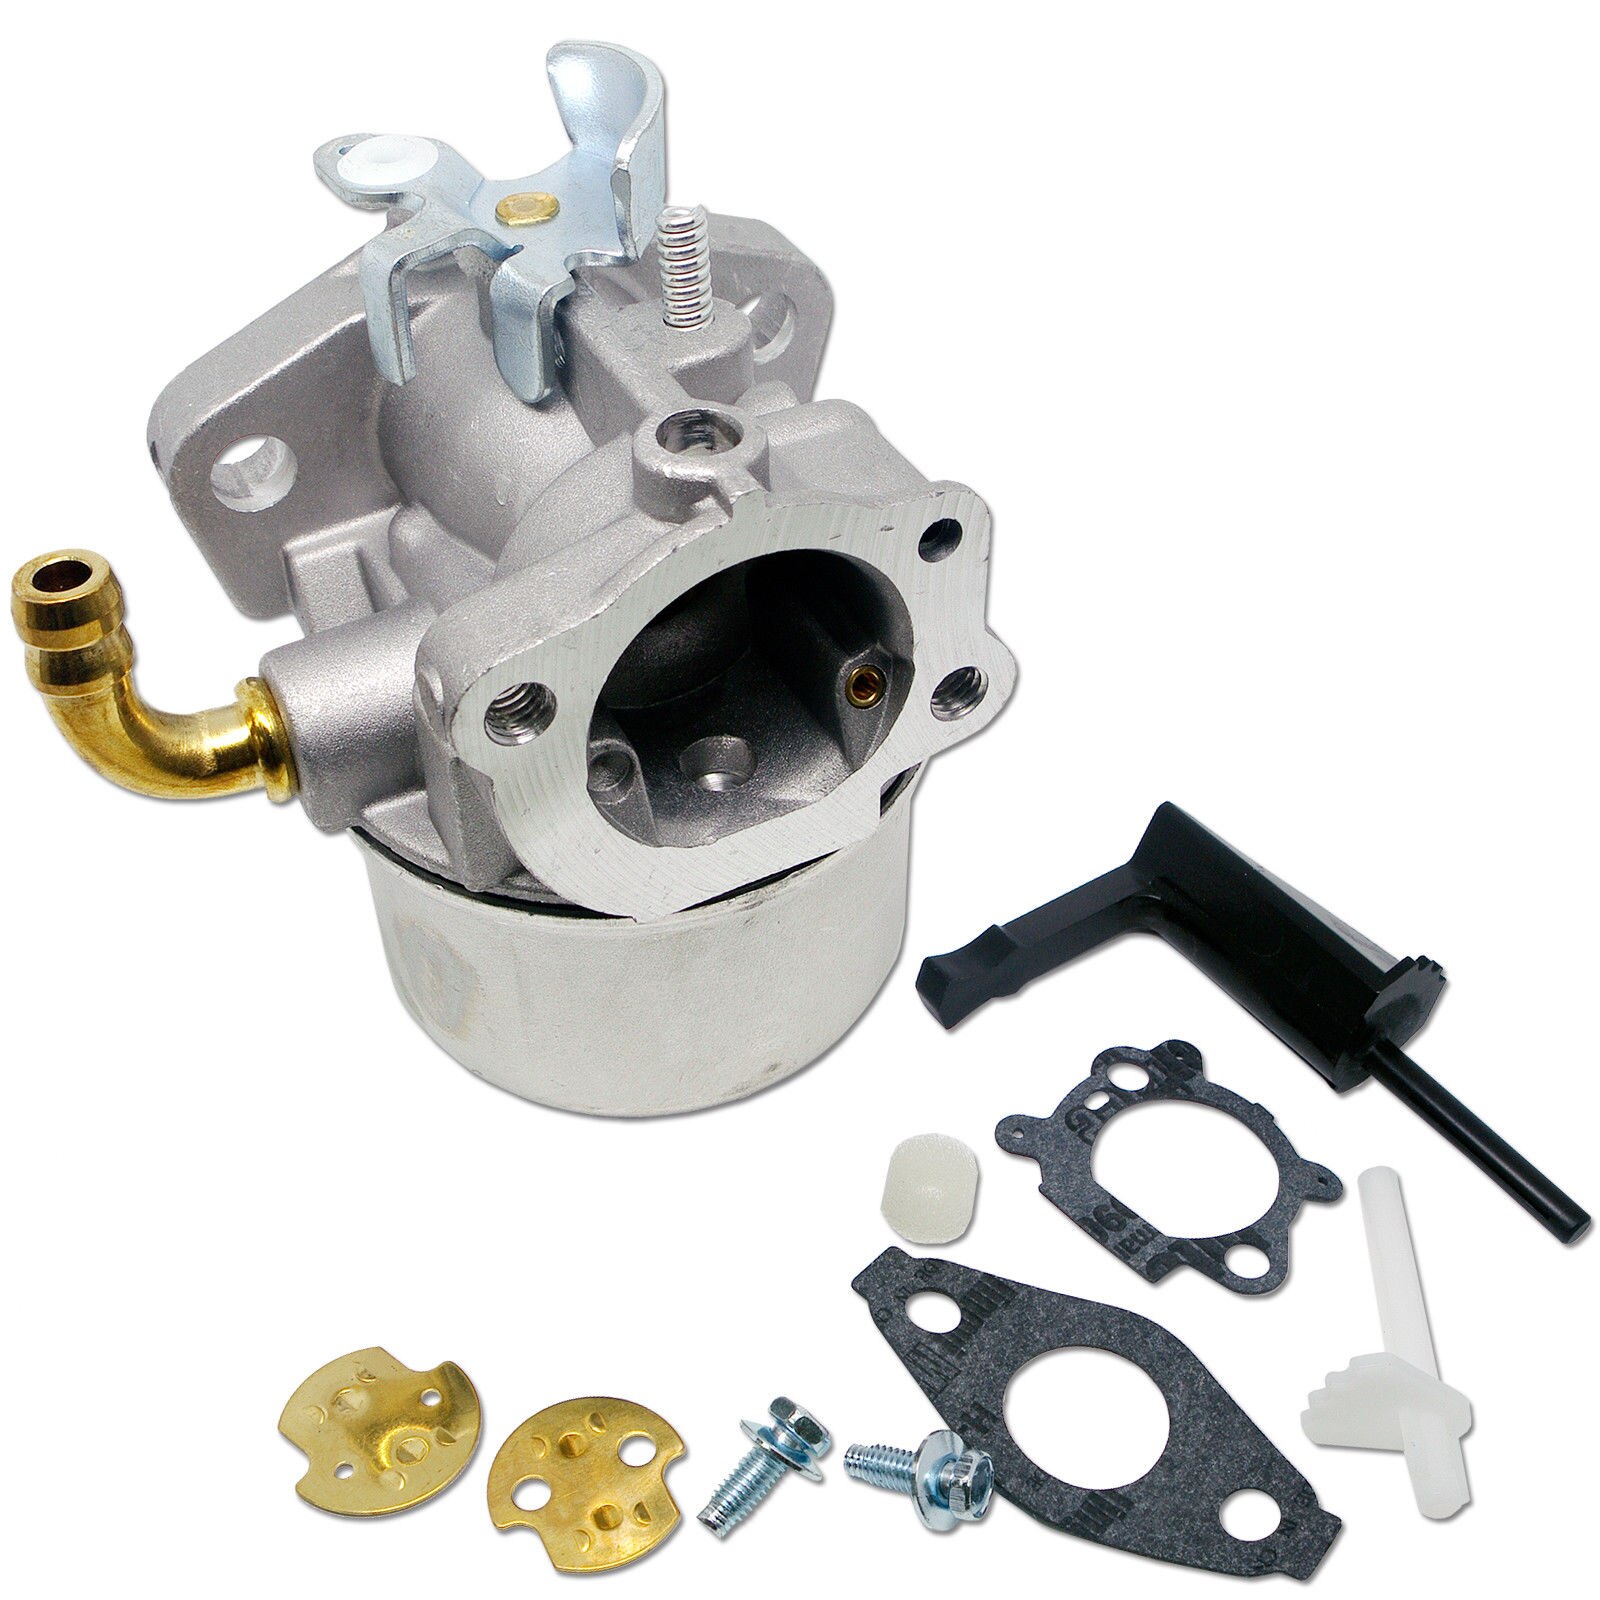 Replaces Carburetor For Briggs And Stratton 12T402 Engines